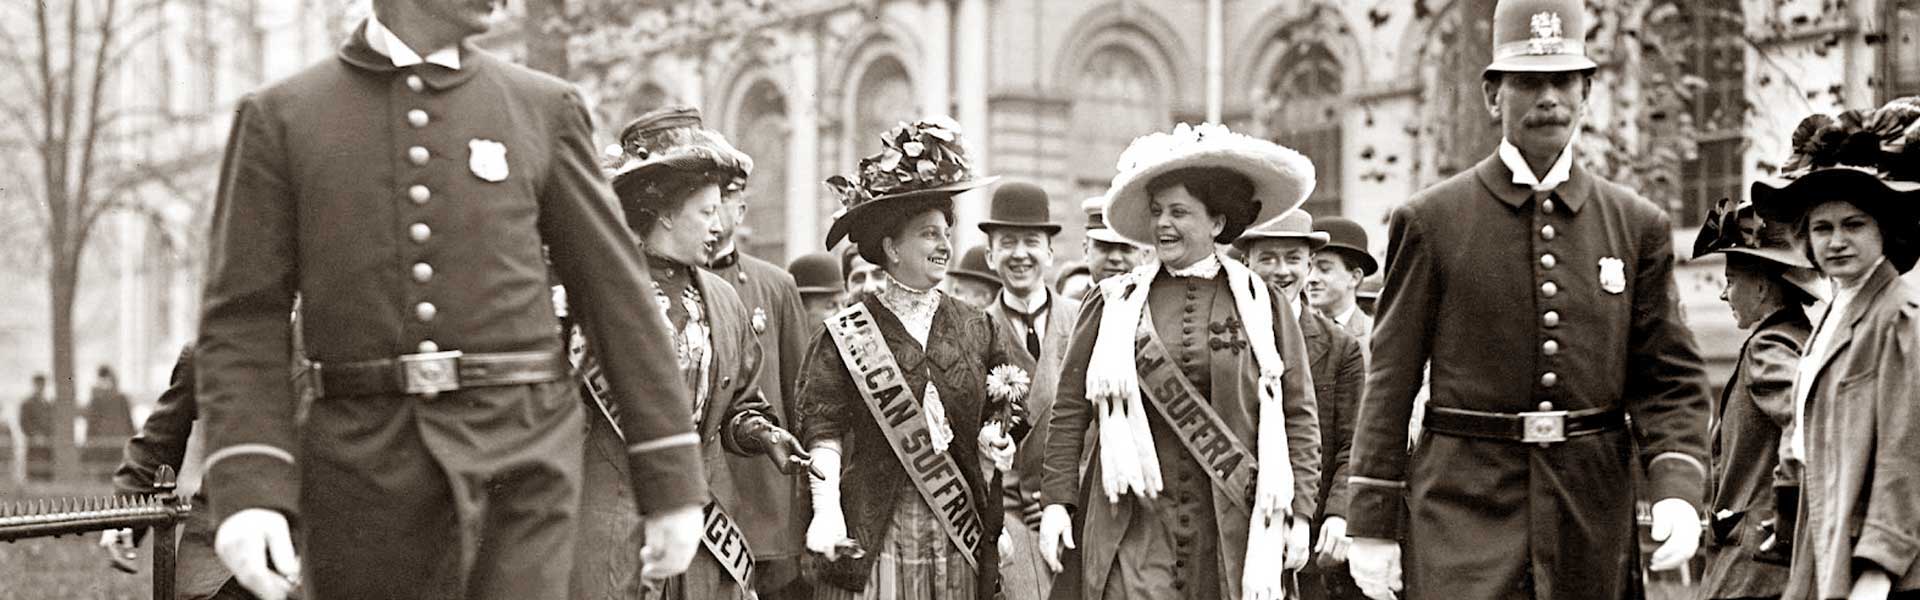 Suffragettes march for the vote